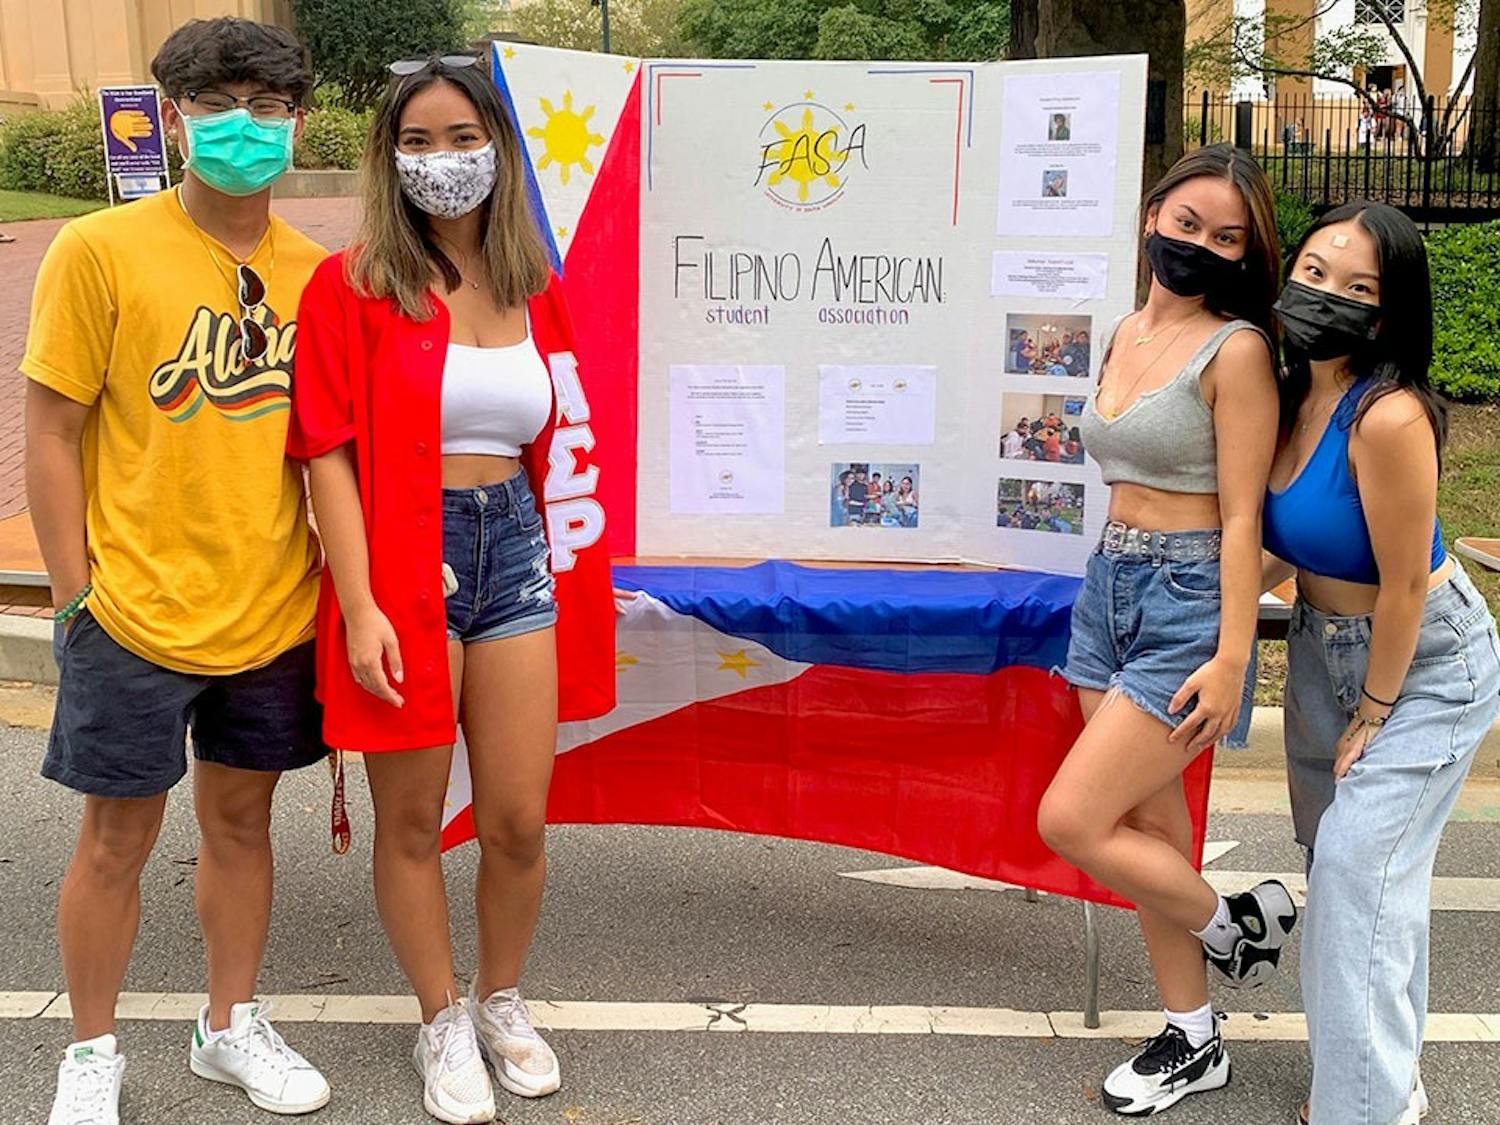 The Filipino American Student Association tabling on Green St. outside the Melton Observatory.